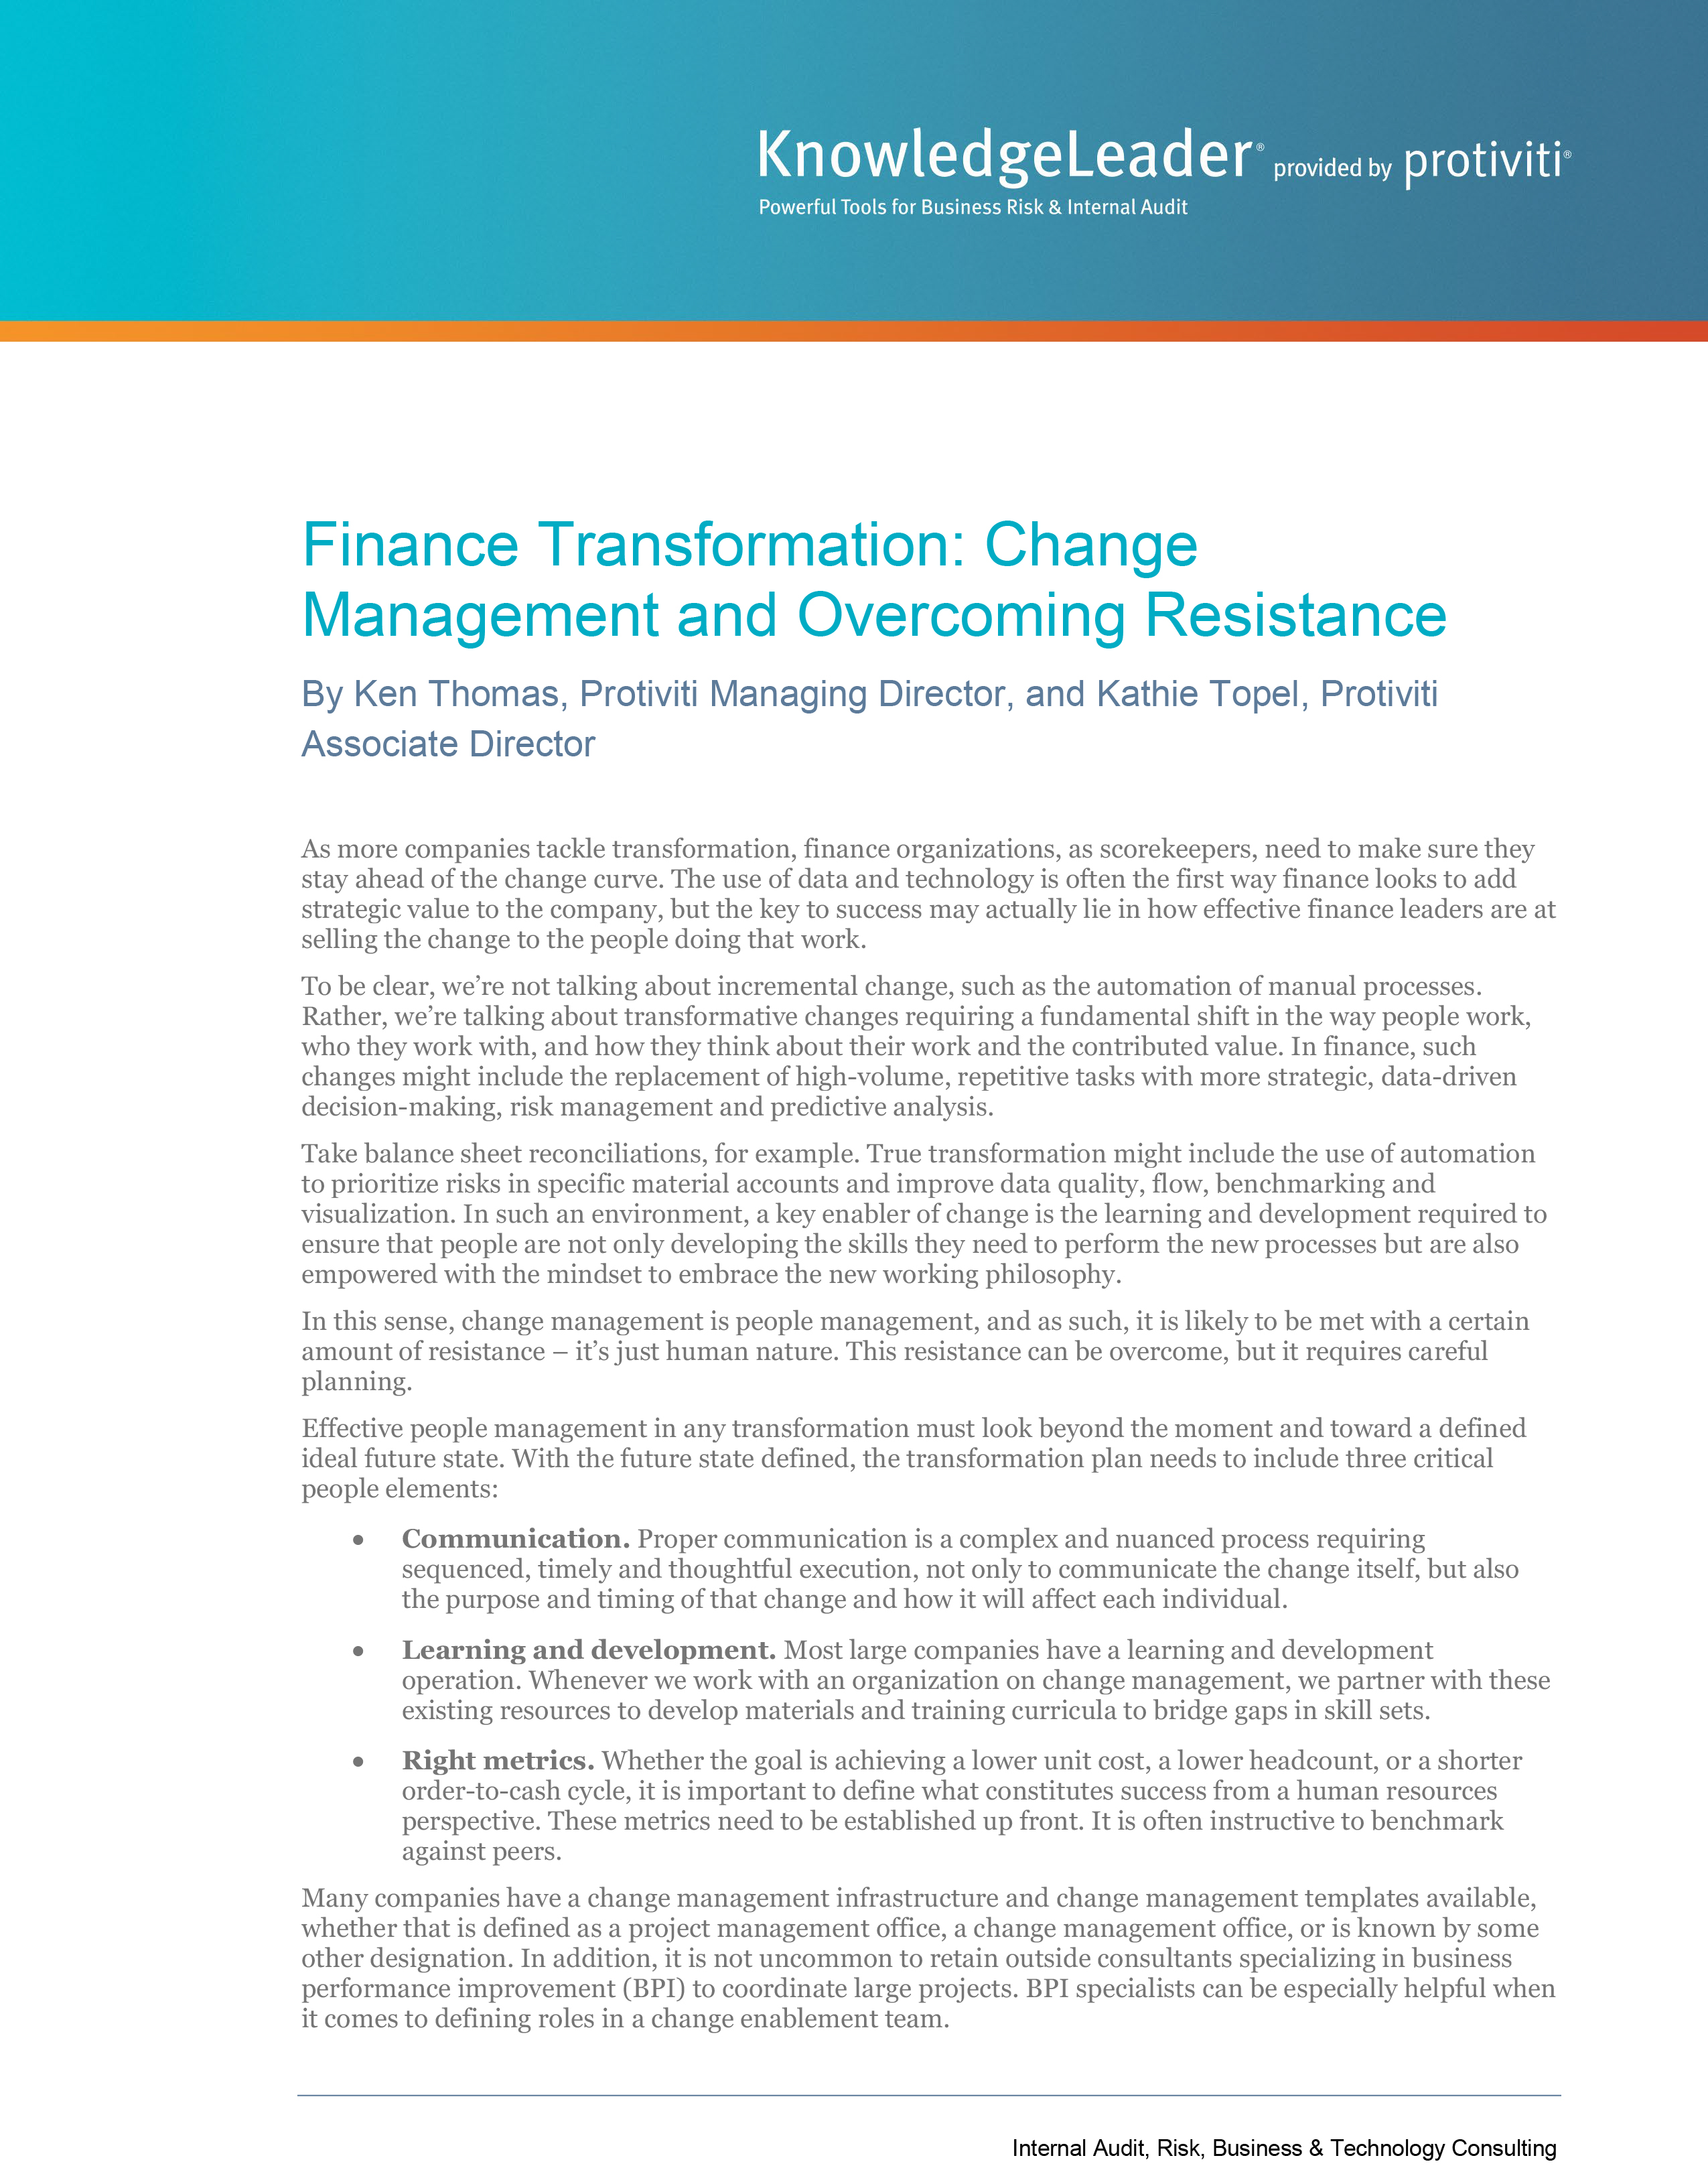 Screenshot of the first page of Finance Transformation - Change Management and Overcoming Resistance